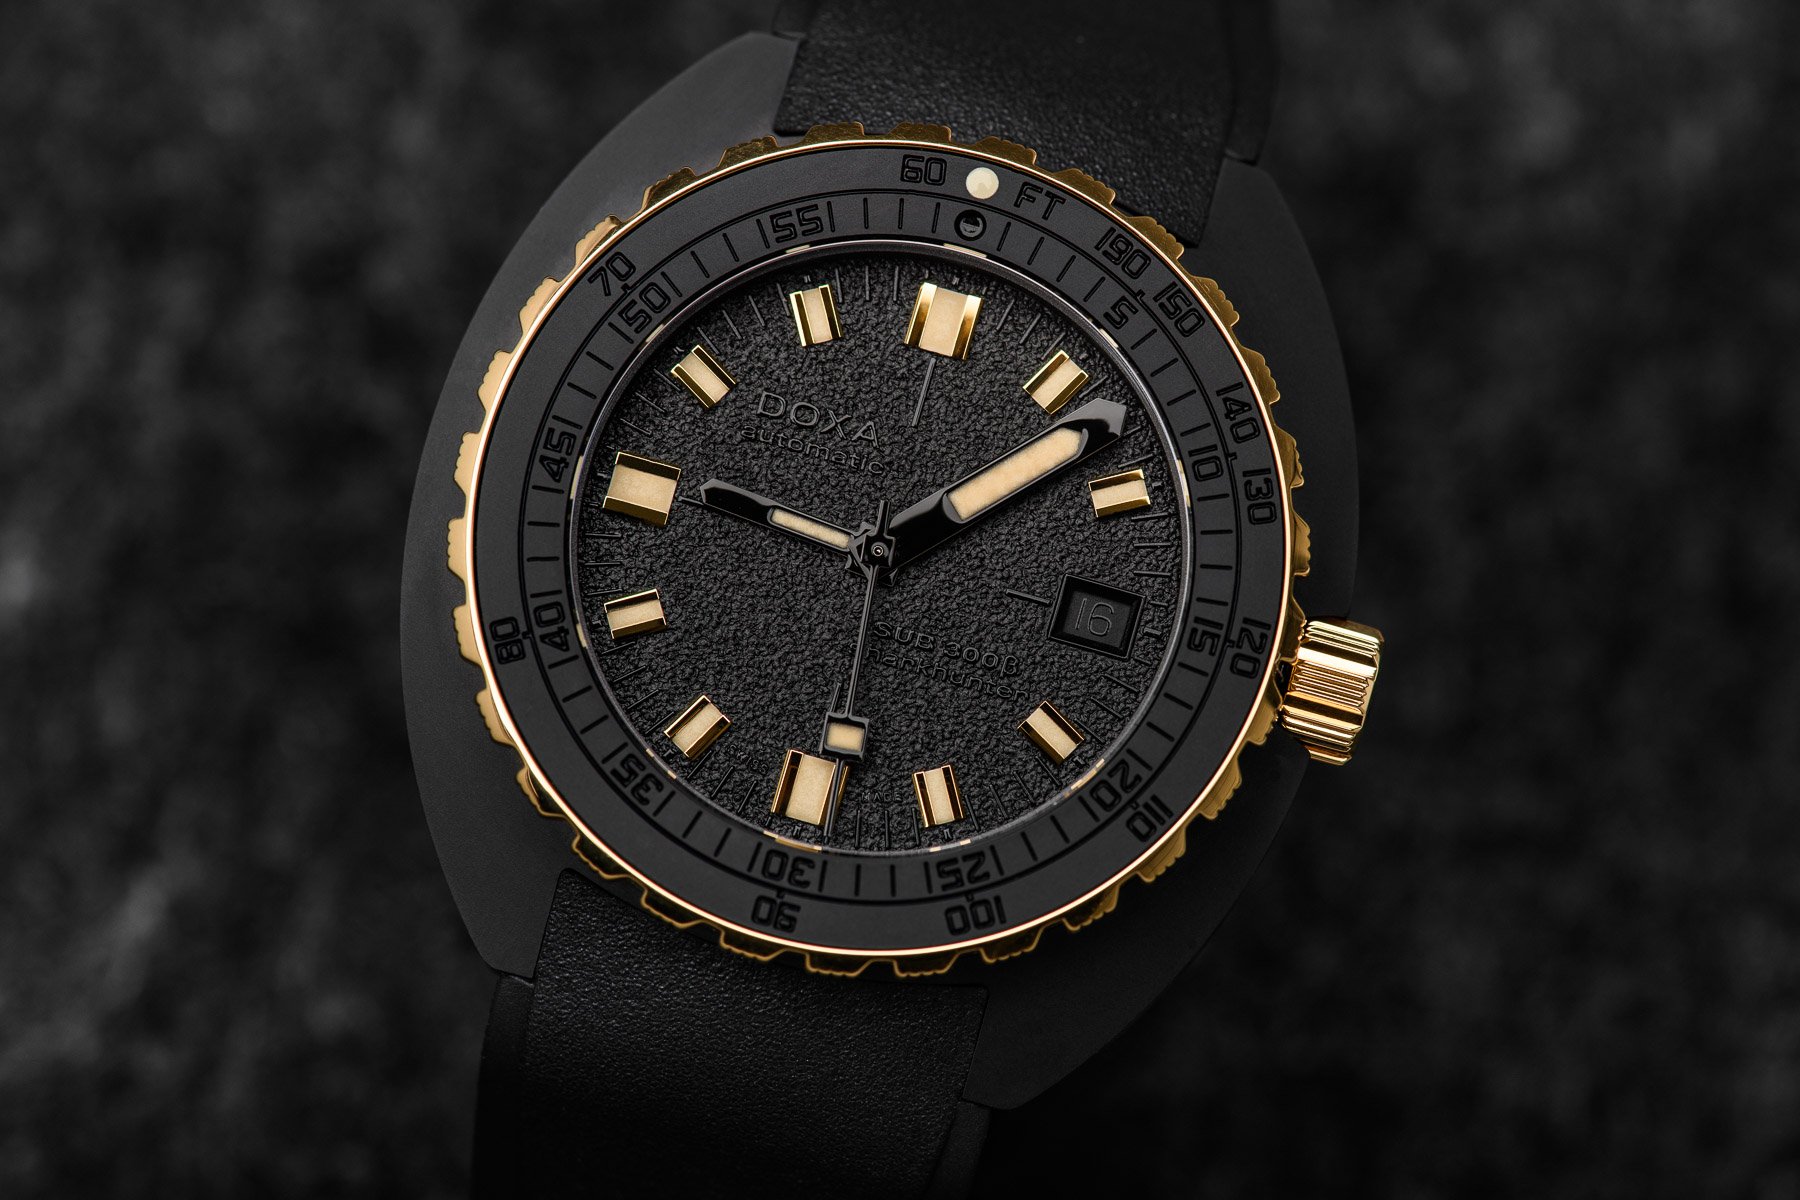 Doxa Introduces The Stealthy And Super Chic Sub 300? Sharkhunter